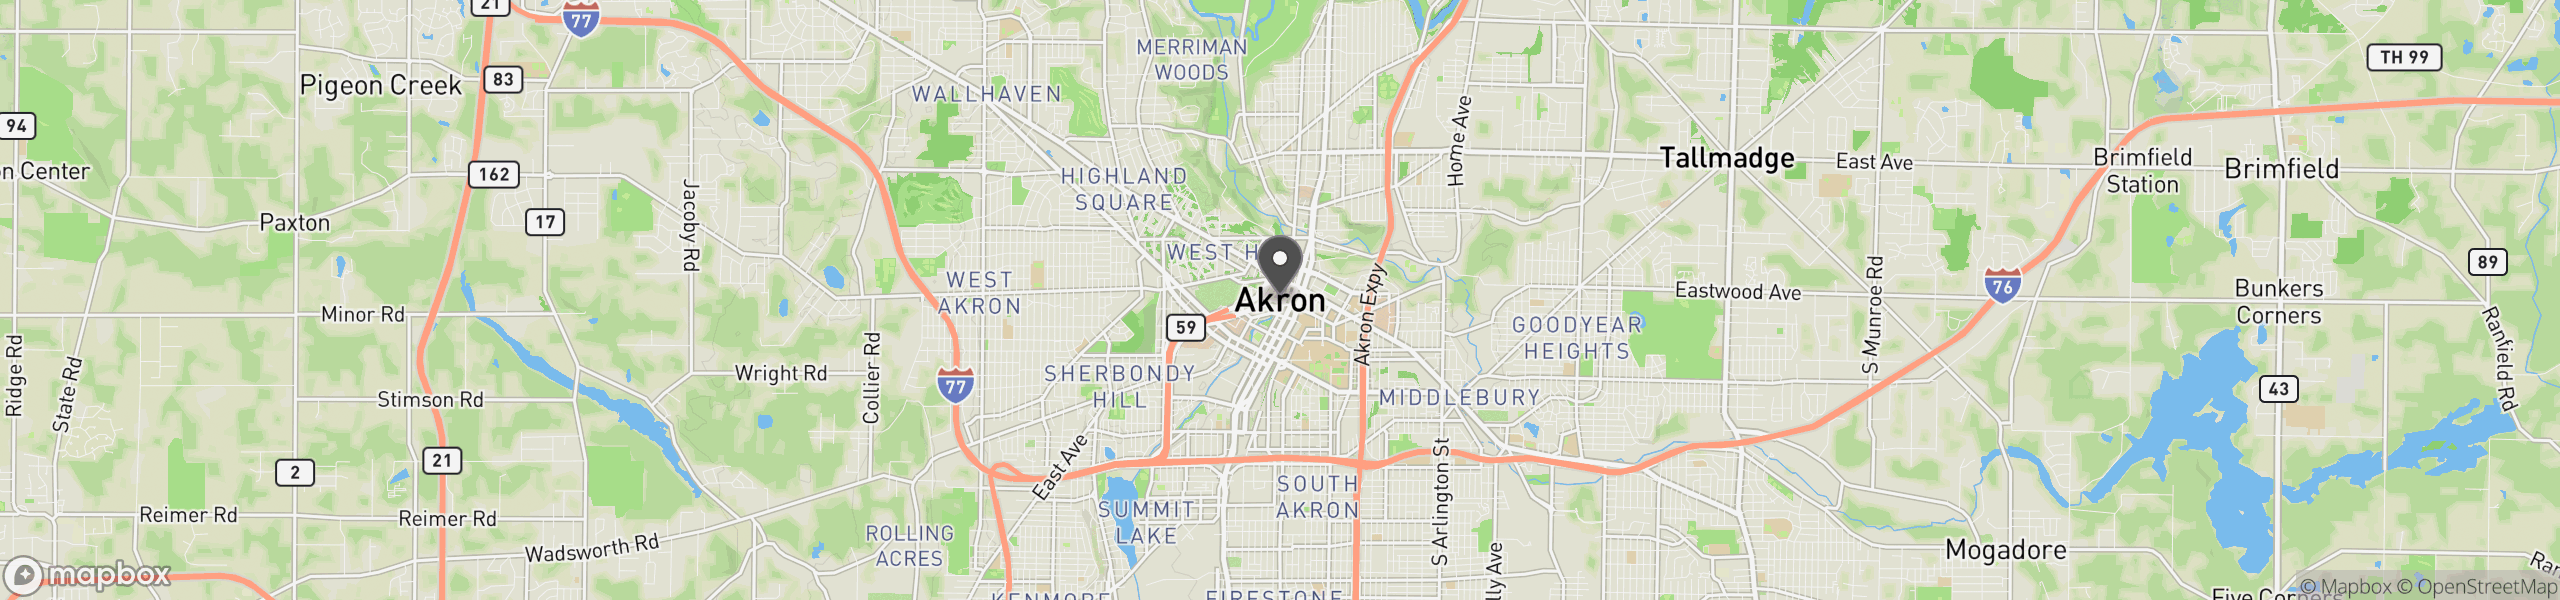 Akron, OH 44319